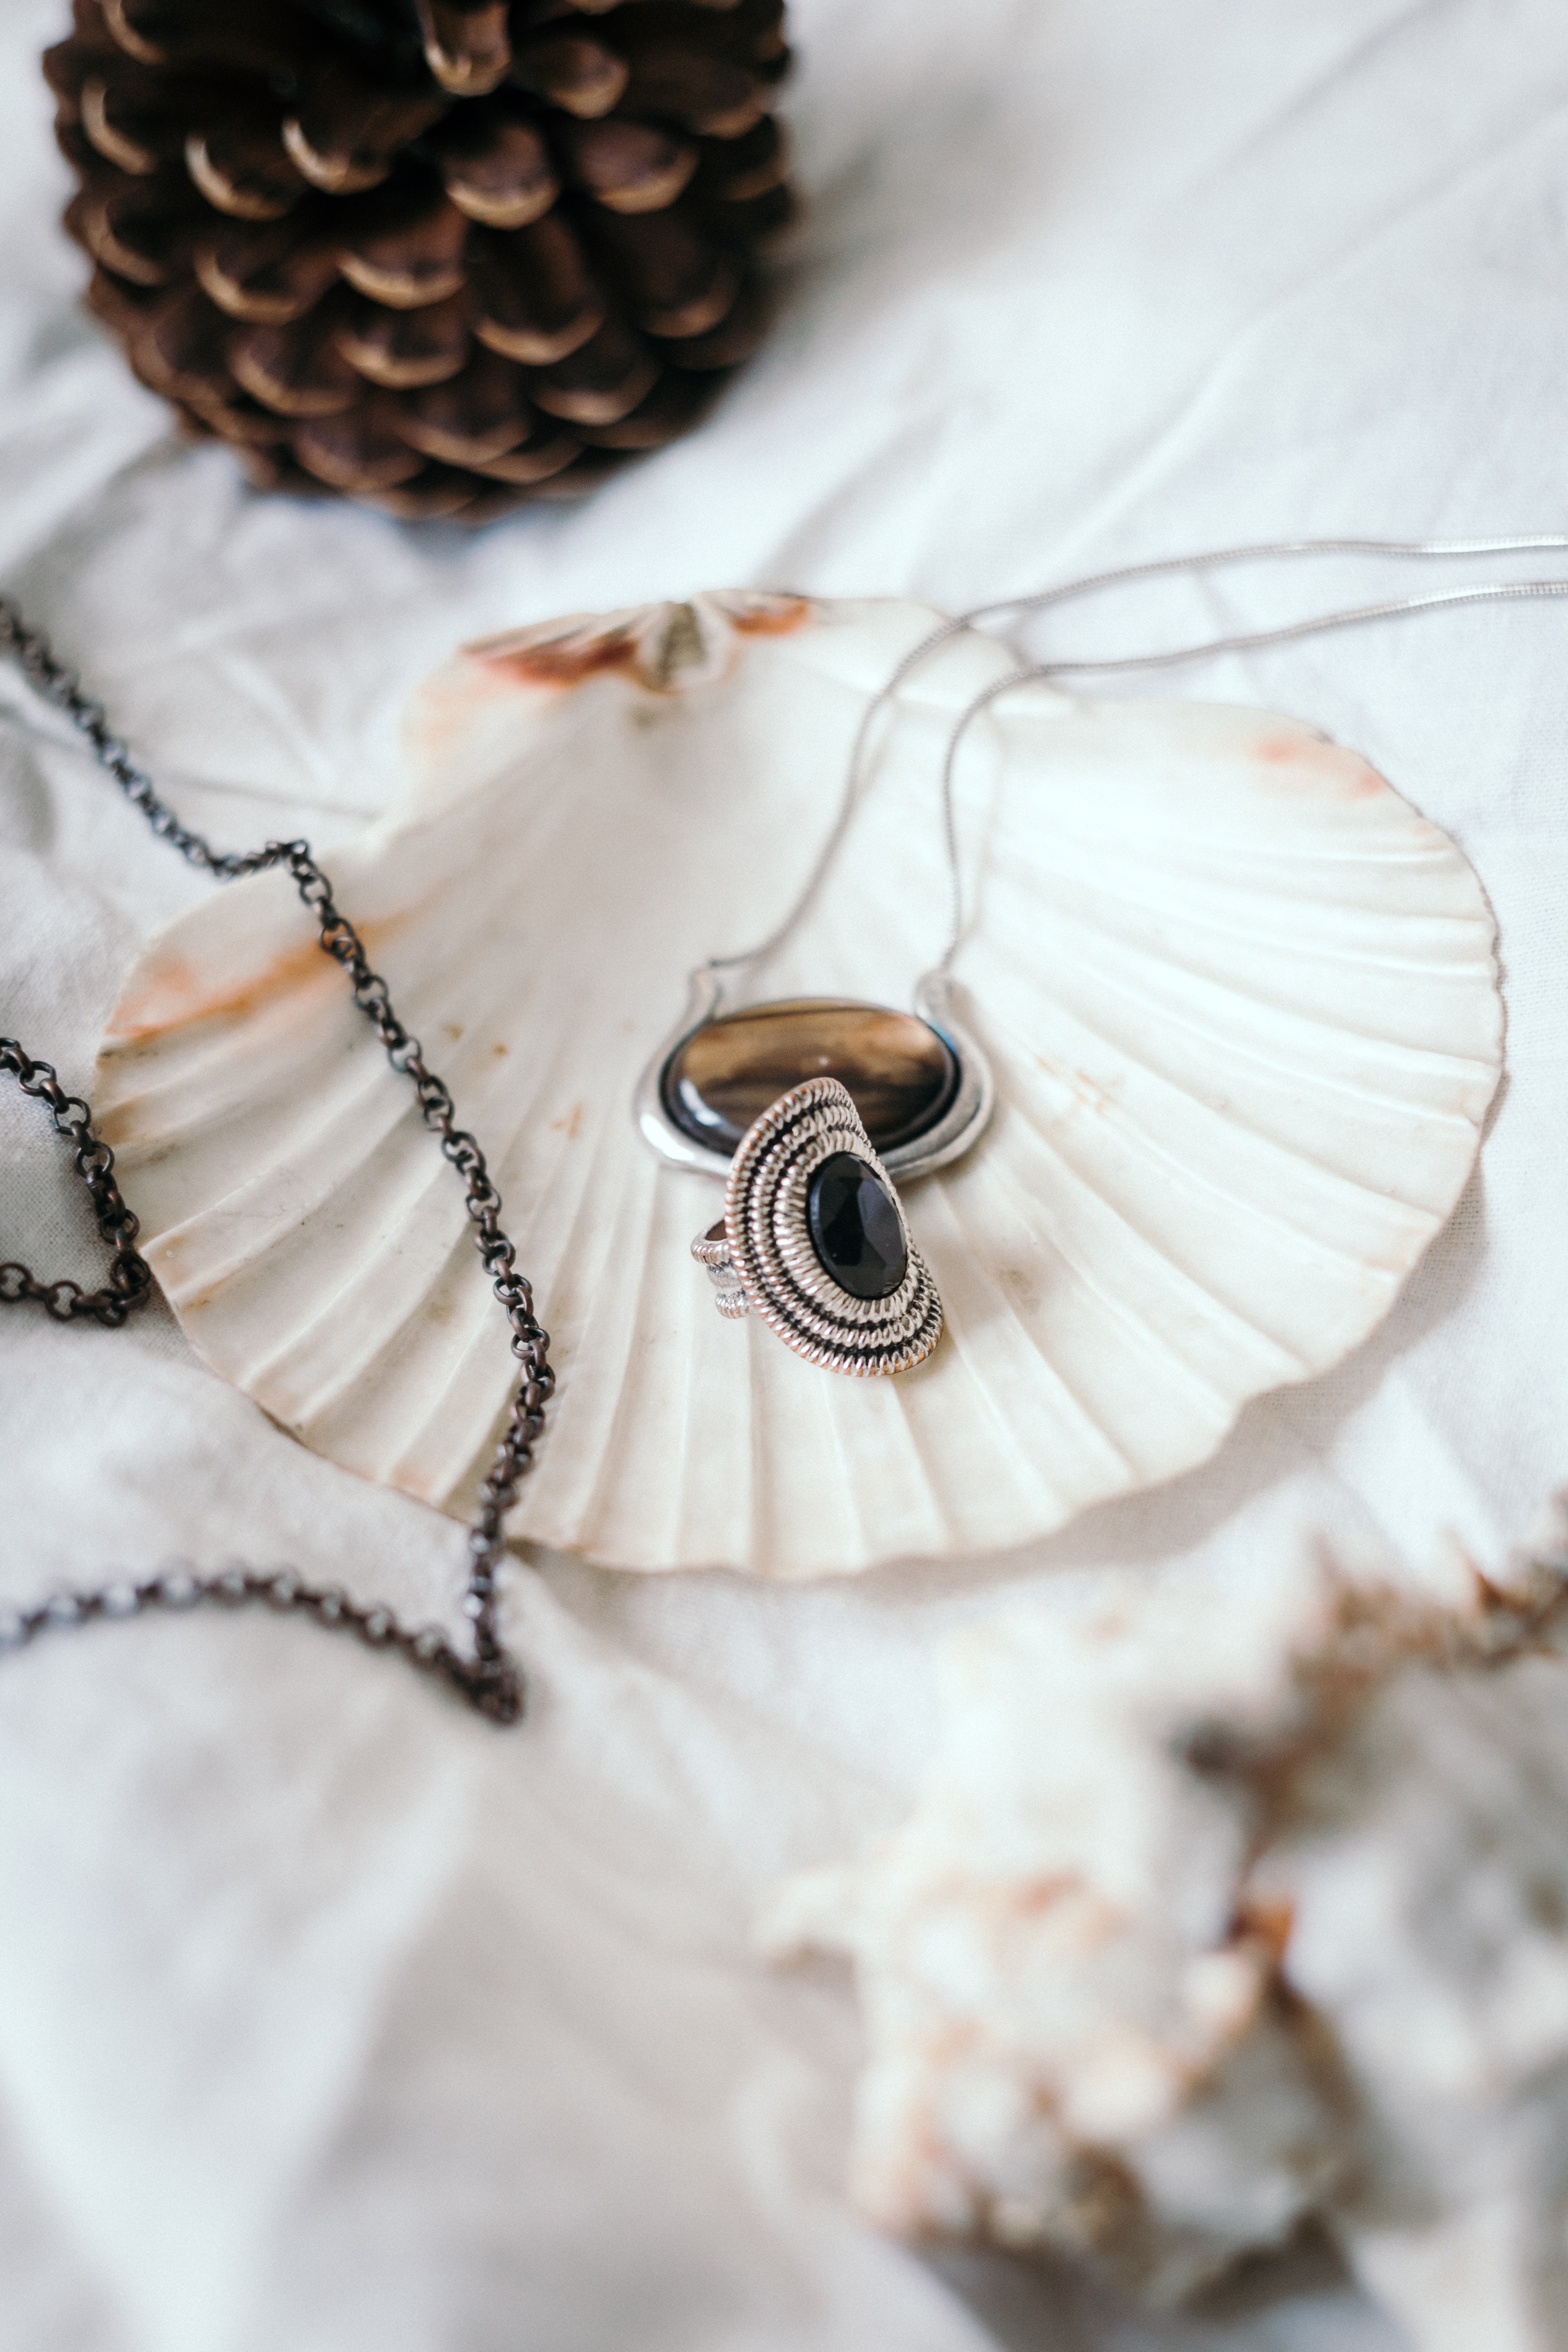 A cabochon gemstone pendant and a cabochon gemstone ring rest on a seashell on a white tablecloth - photo by Jakub Tabisz via Pexels